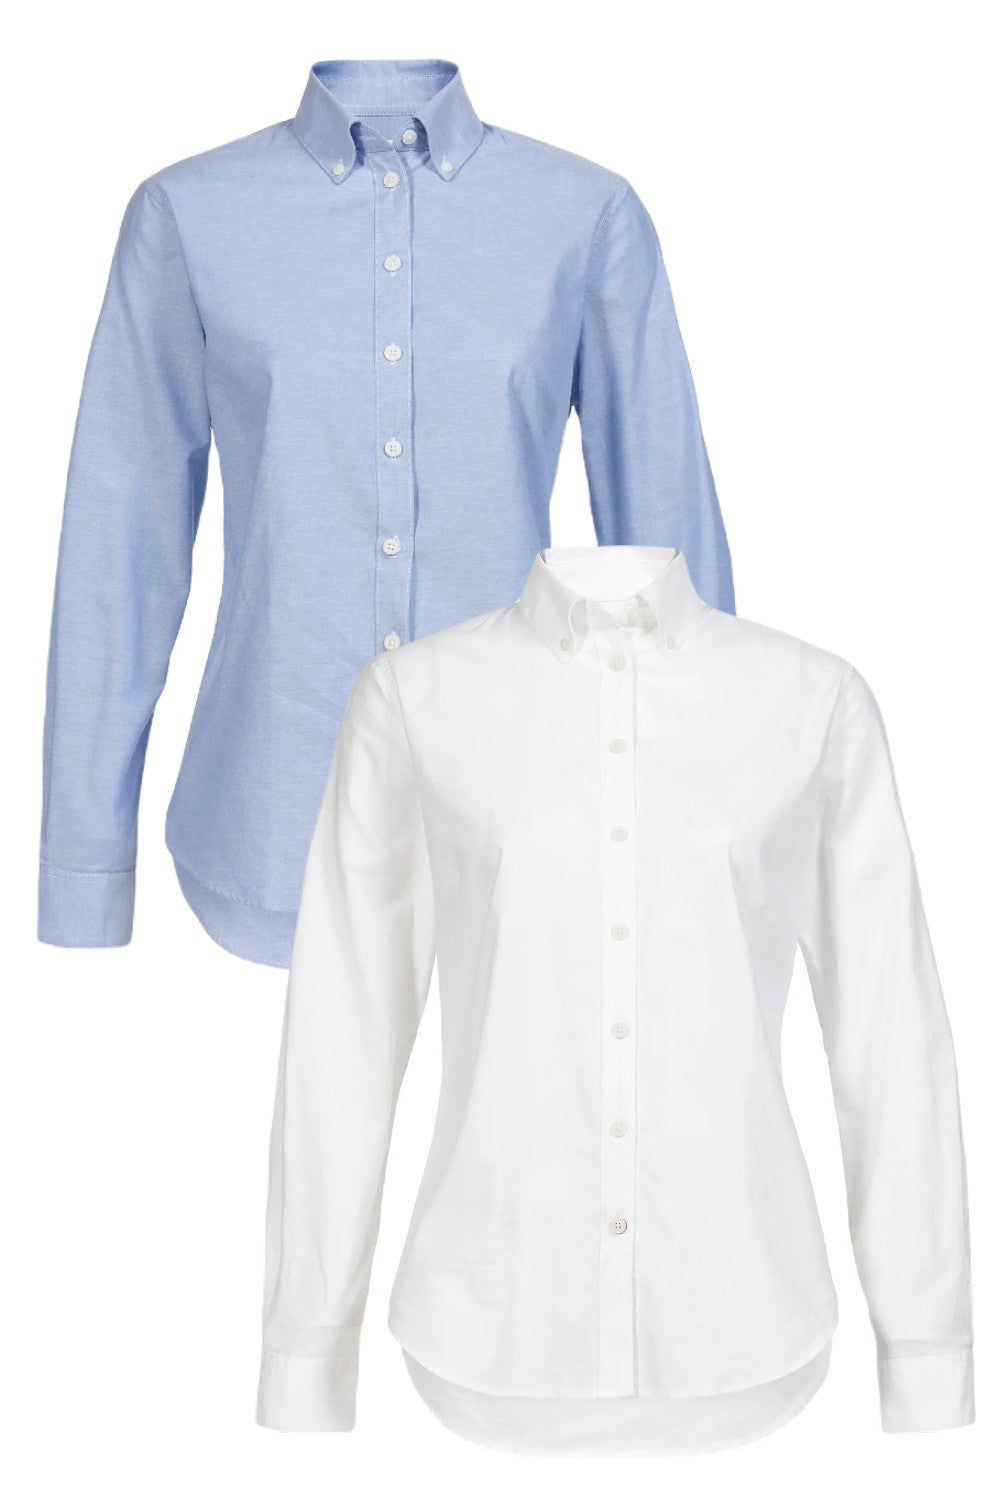 Musto Womens Essential Long Sleeve Oxford Shirt In Pale Blue and White 